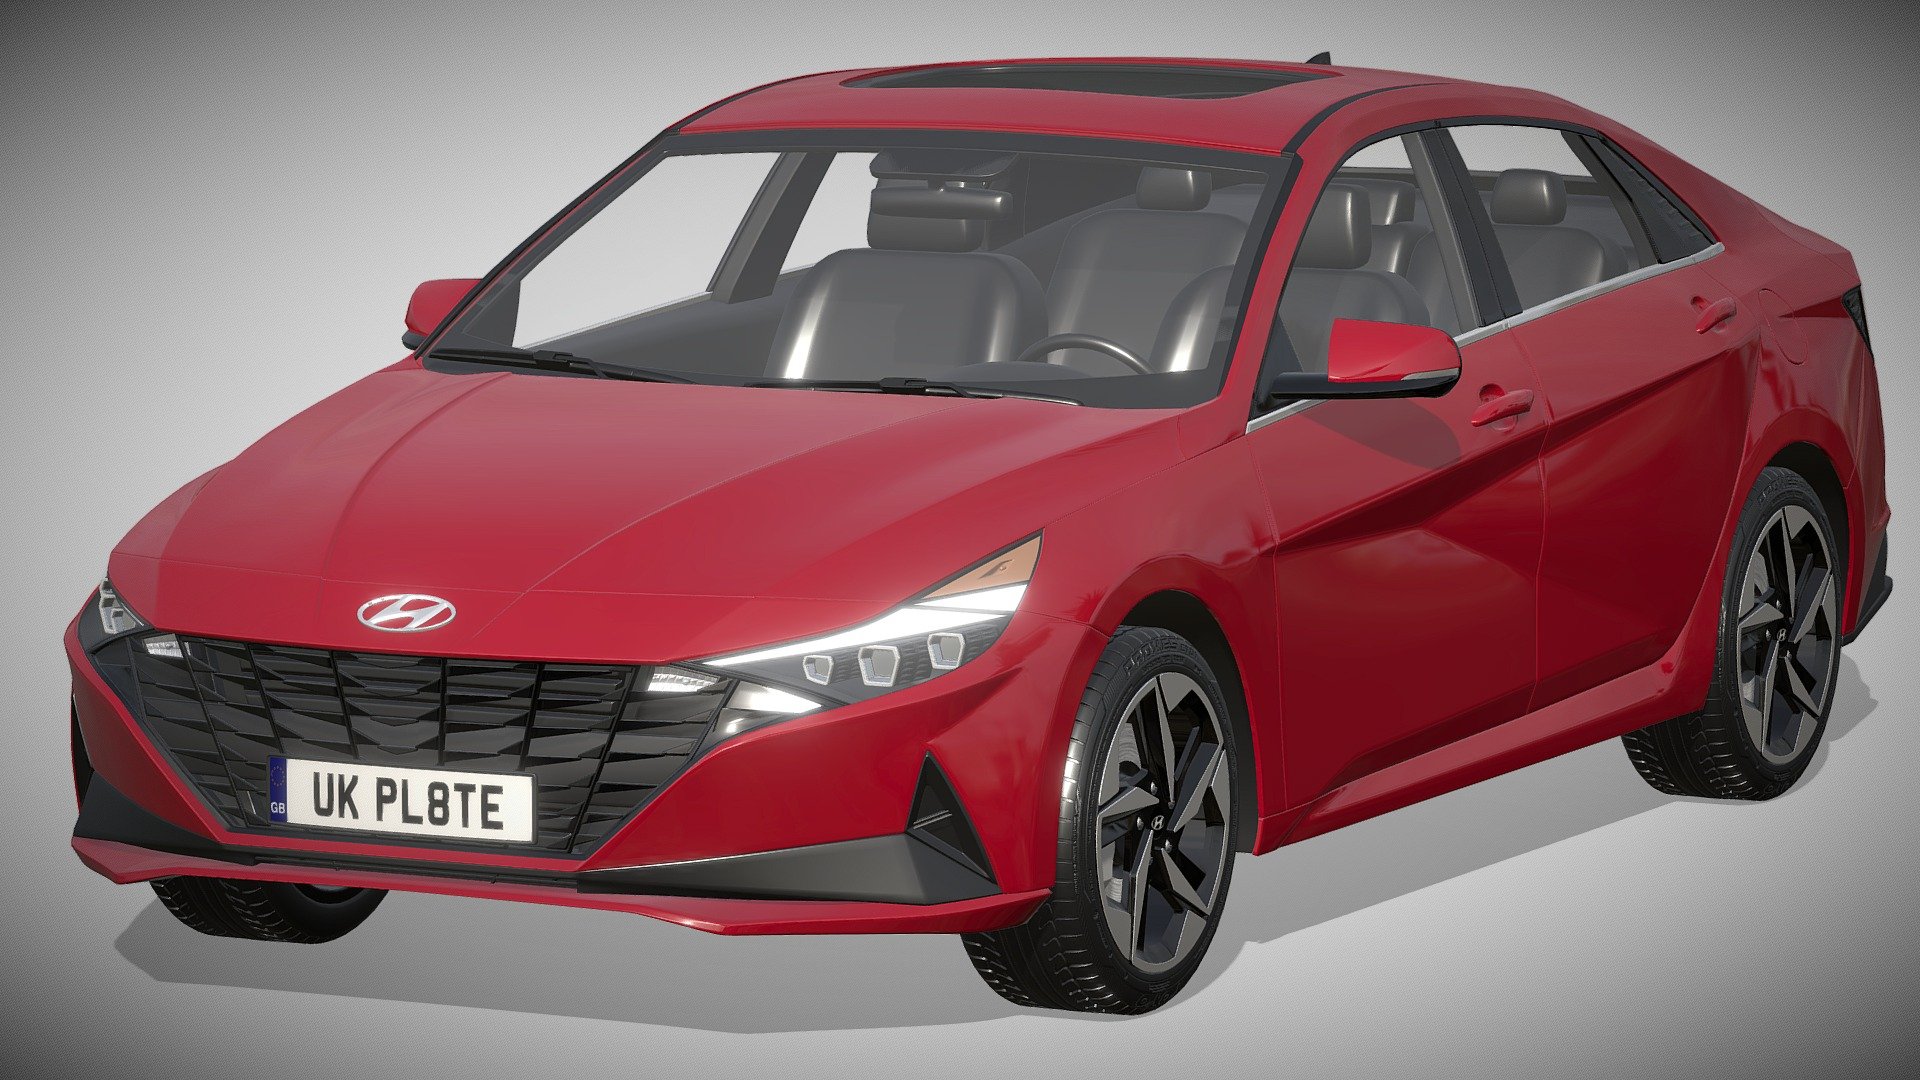 Hyundai Elantra 2021

https://www.hyundaiusa.com/us/en/vehicles/elantra

Clean geometry Light weight model, yet completely detailed for HI-Res renders. Use for movies, Advertisements or games

Corona render and materials

All textures include in *.rar files

Lighting setup is not included in the file! - Hyundai Elantra 2021 - Buy Royalty Free 3D model by zifir3d 3d model